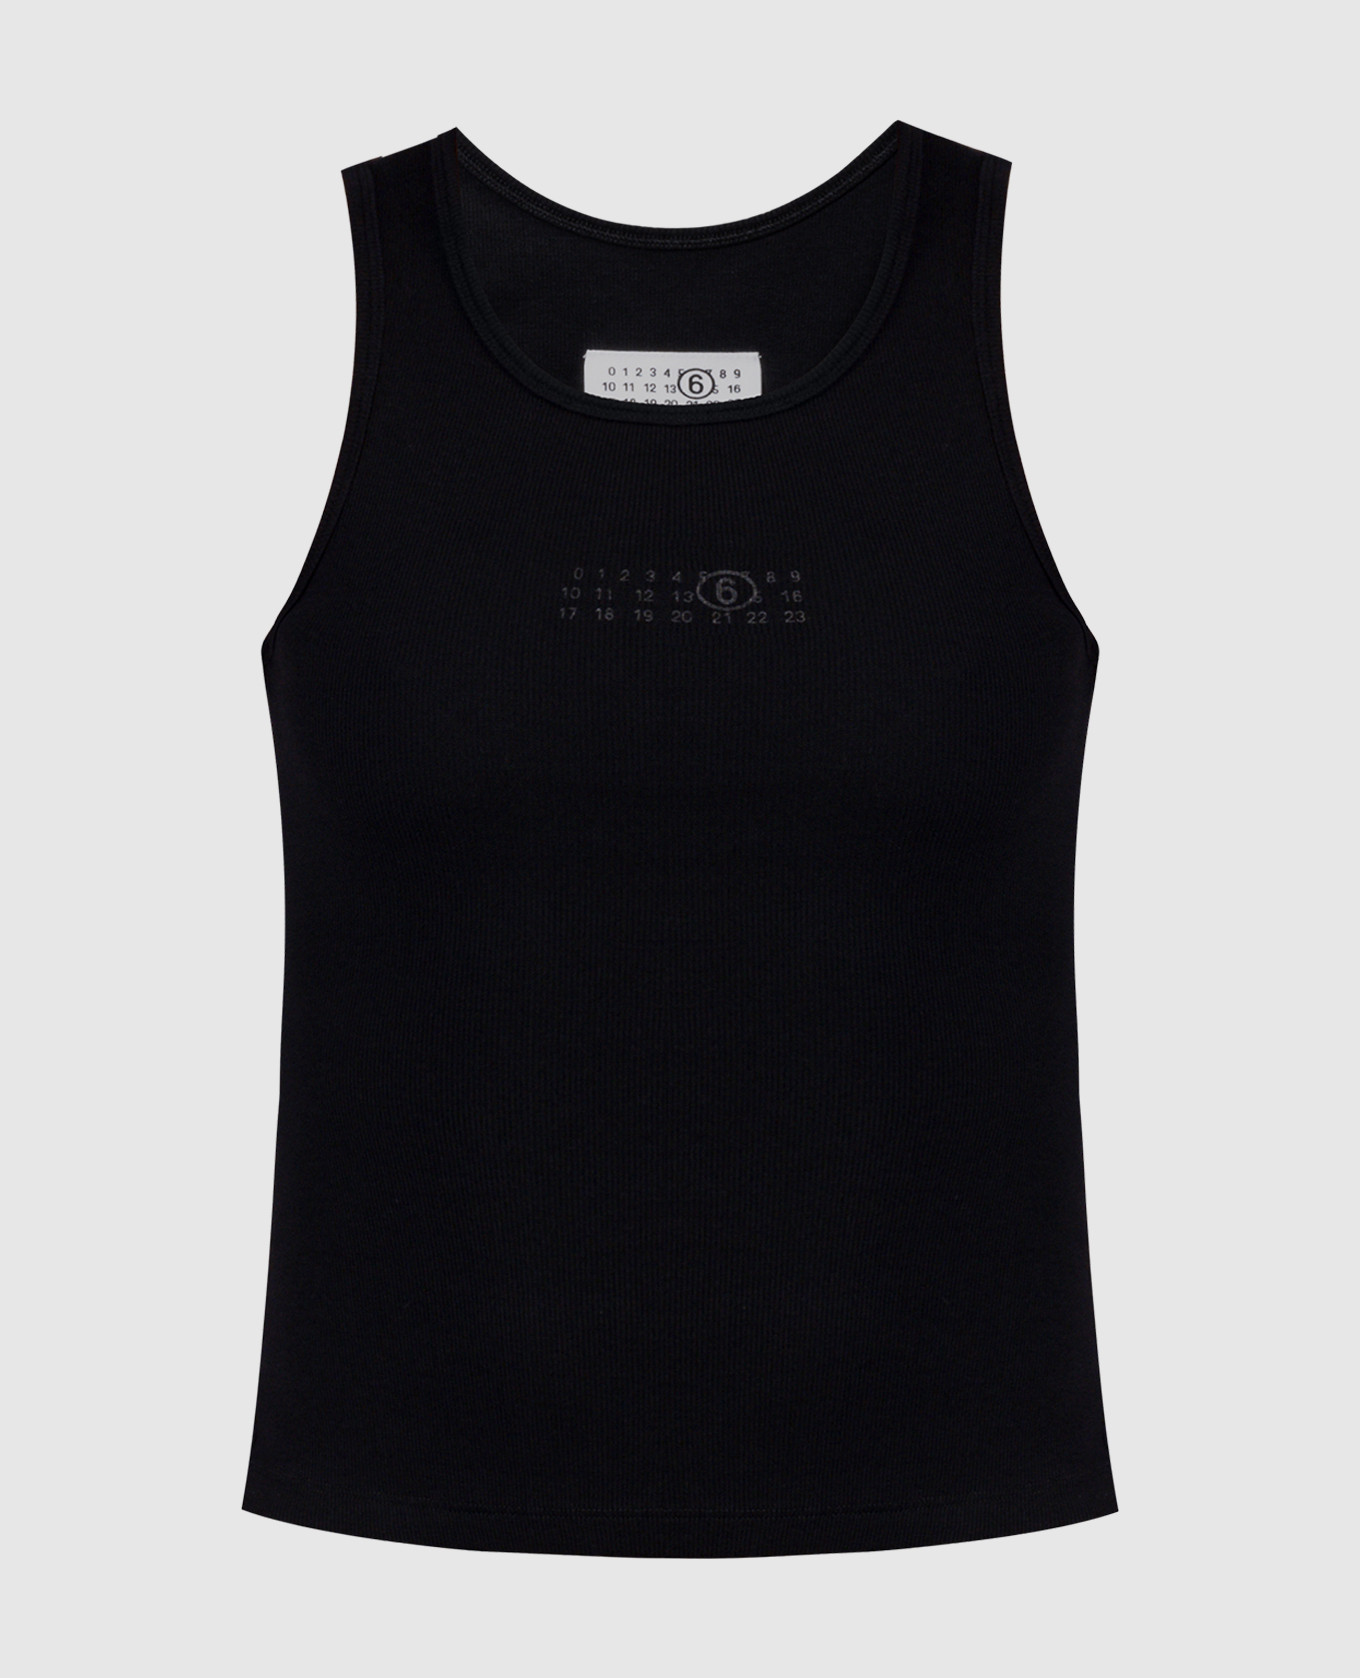 Black ribbed top with logo print